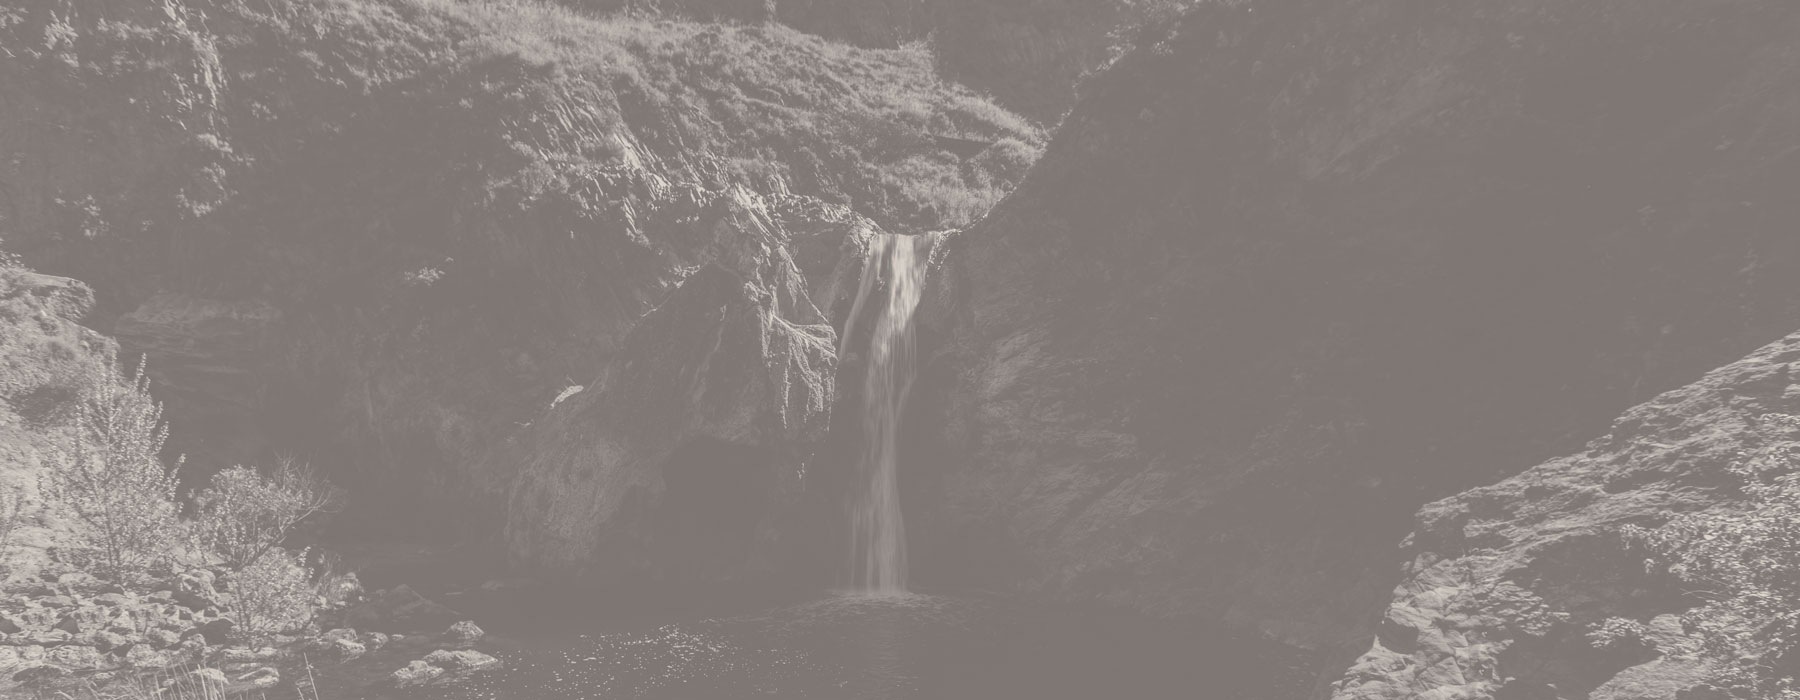 an image of a waterfall with a heavy grey color overlay over the image